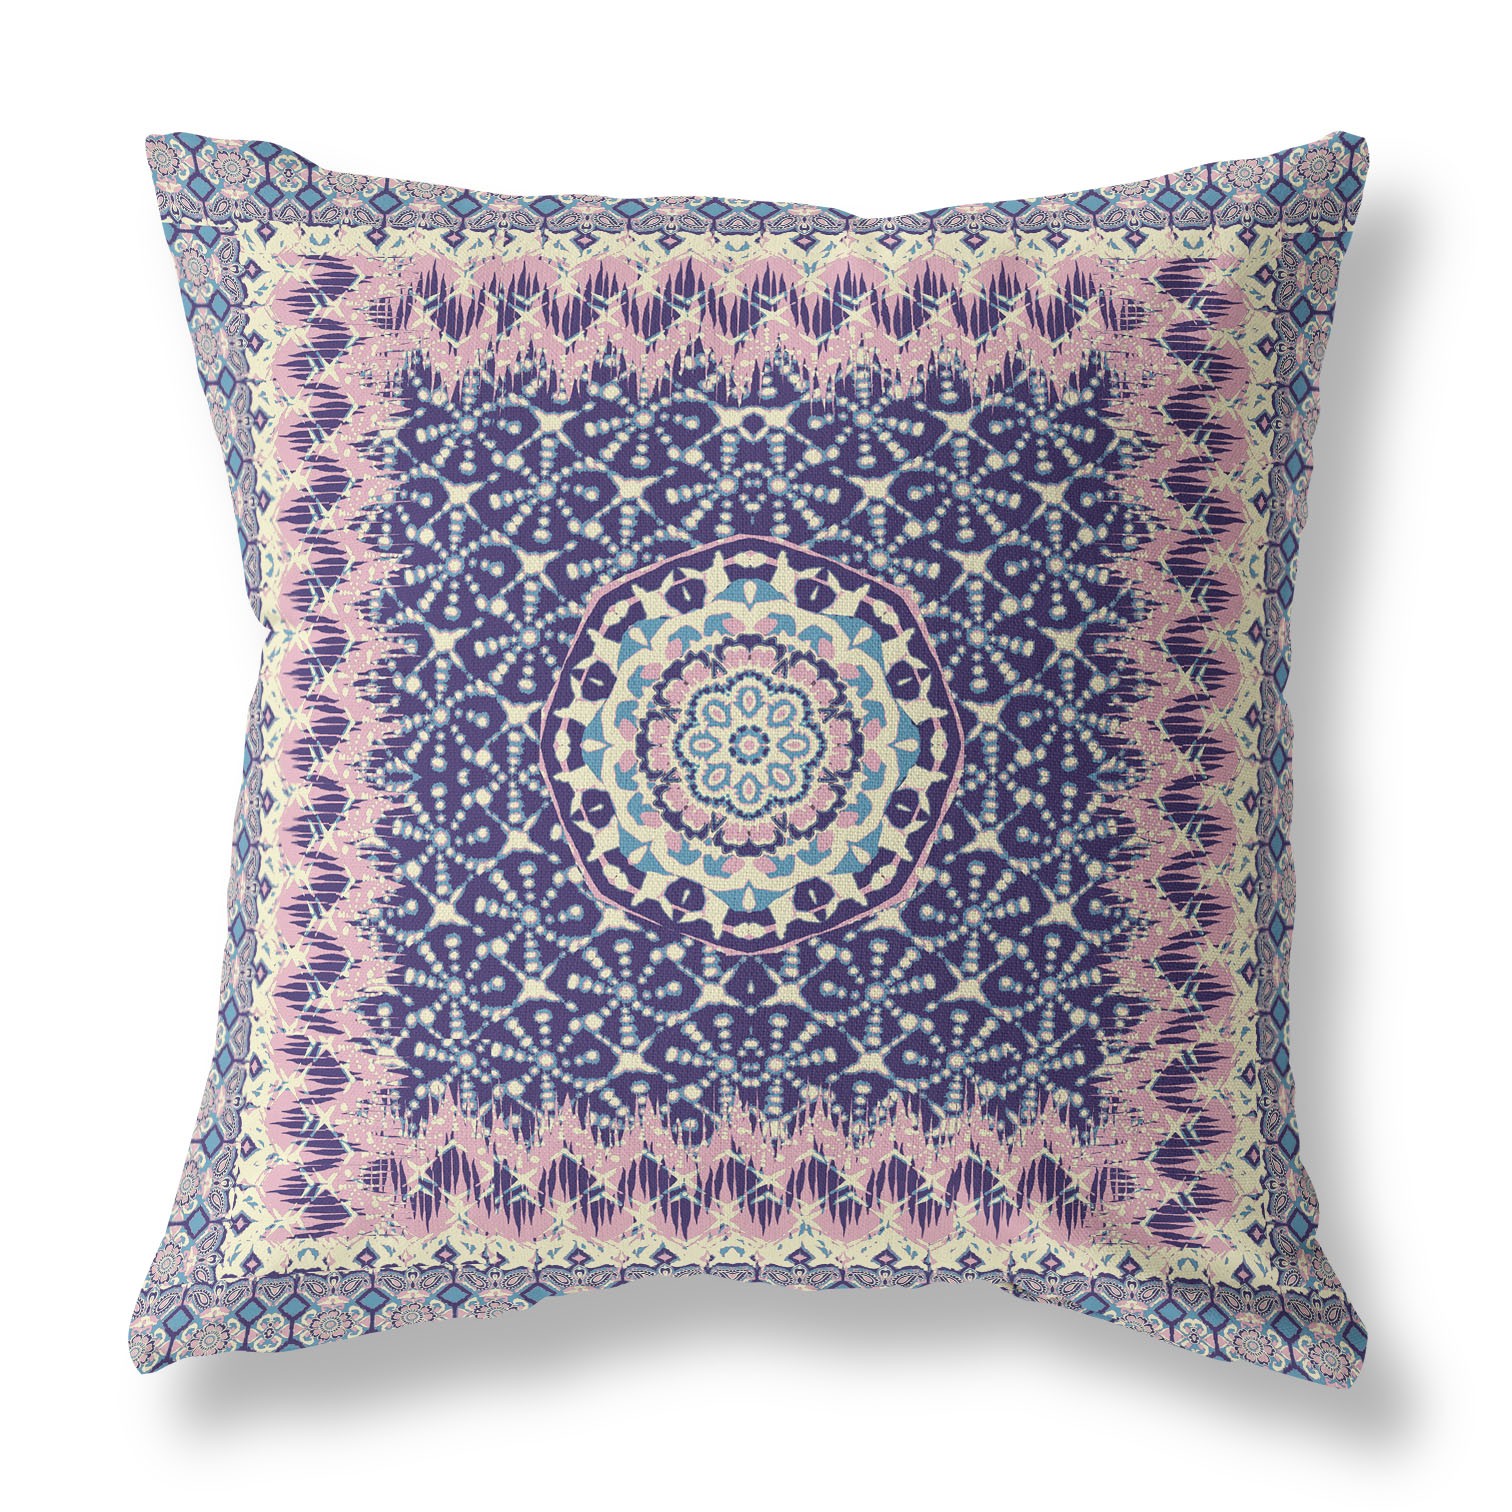 Holy Tie Die Flower Broadcloth Indoor Outdoor Blown and Closed Pillow by Amrita Sen in Pink Indigo-414622-1